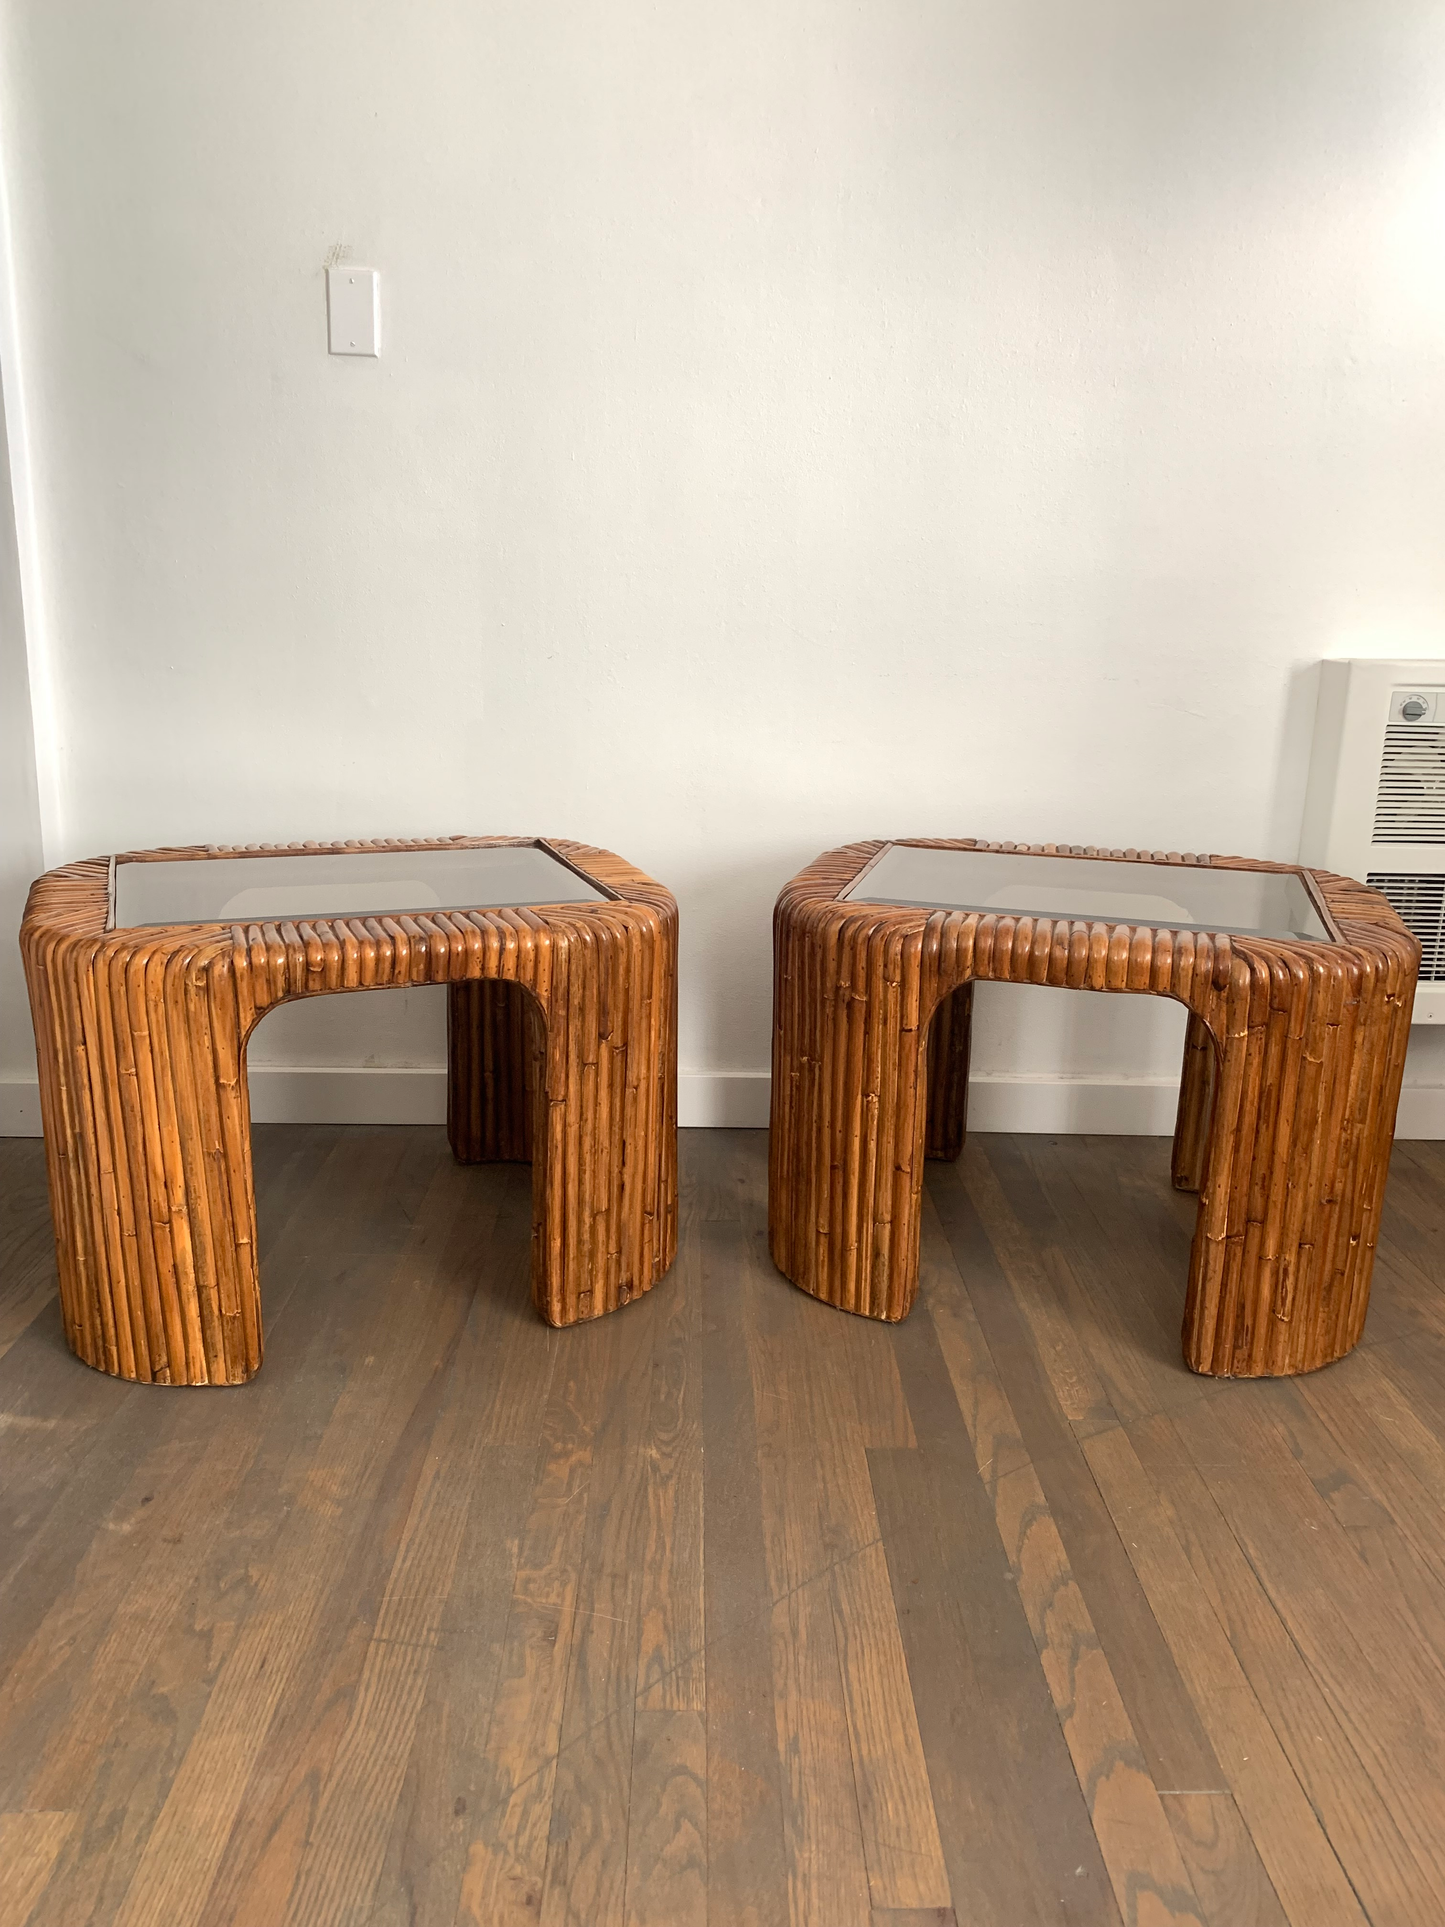 Late 20th Century Split Reed Bamboo Rattan Smoked Glass Waterfall Side Tables - a Pair